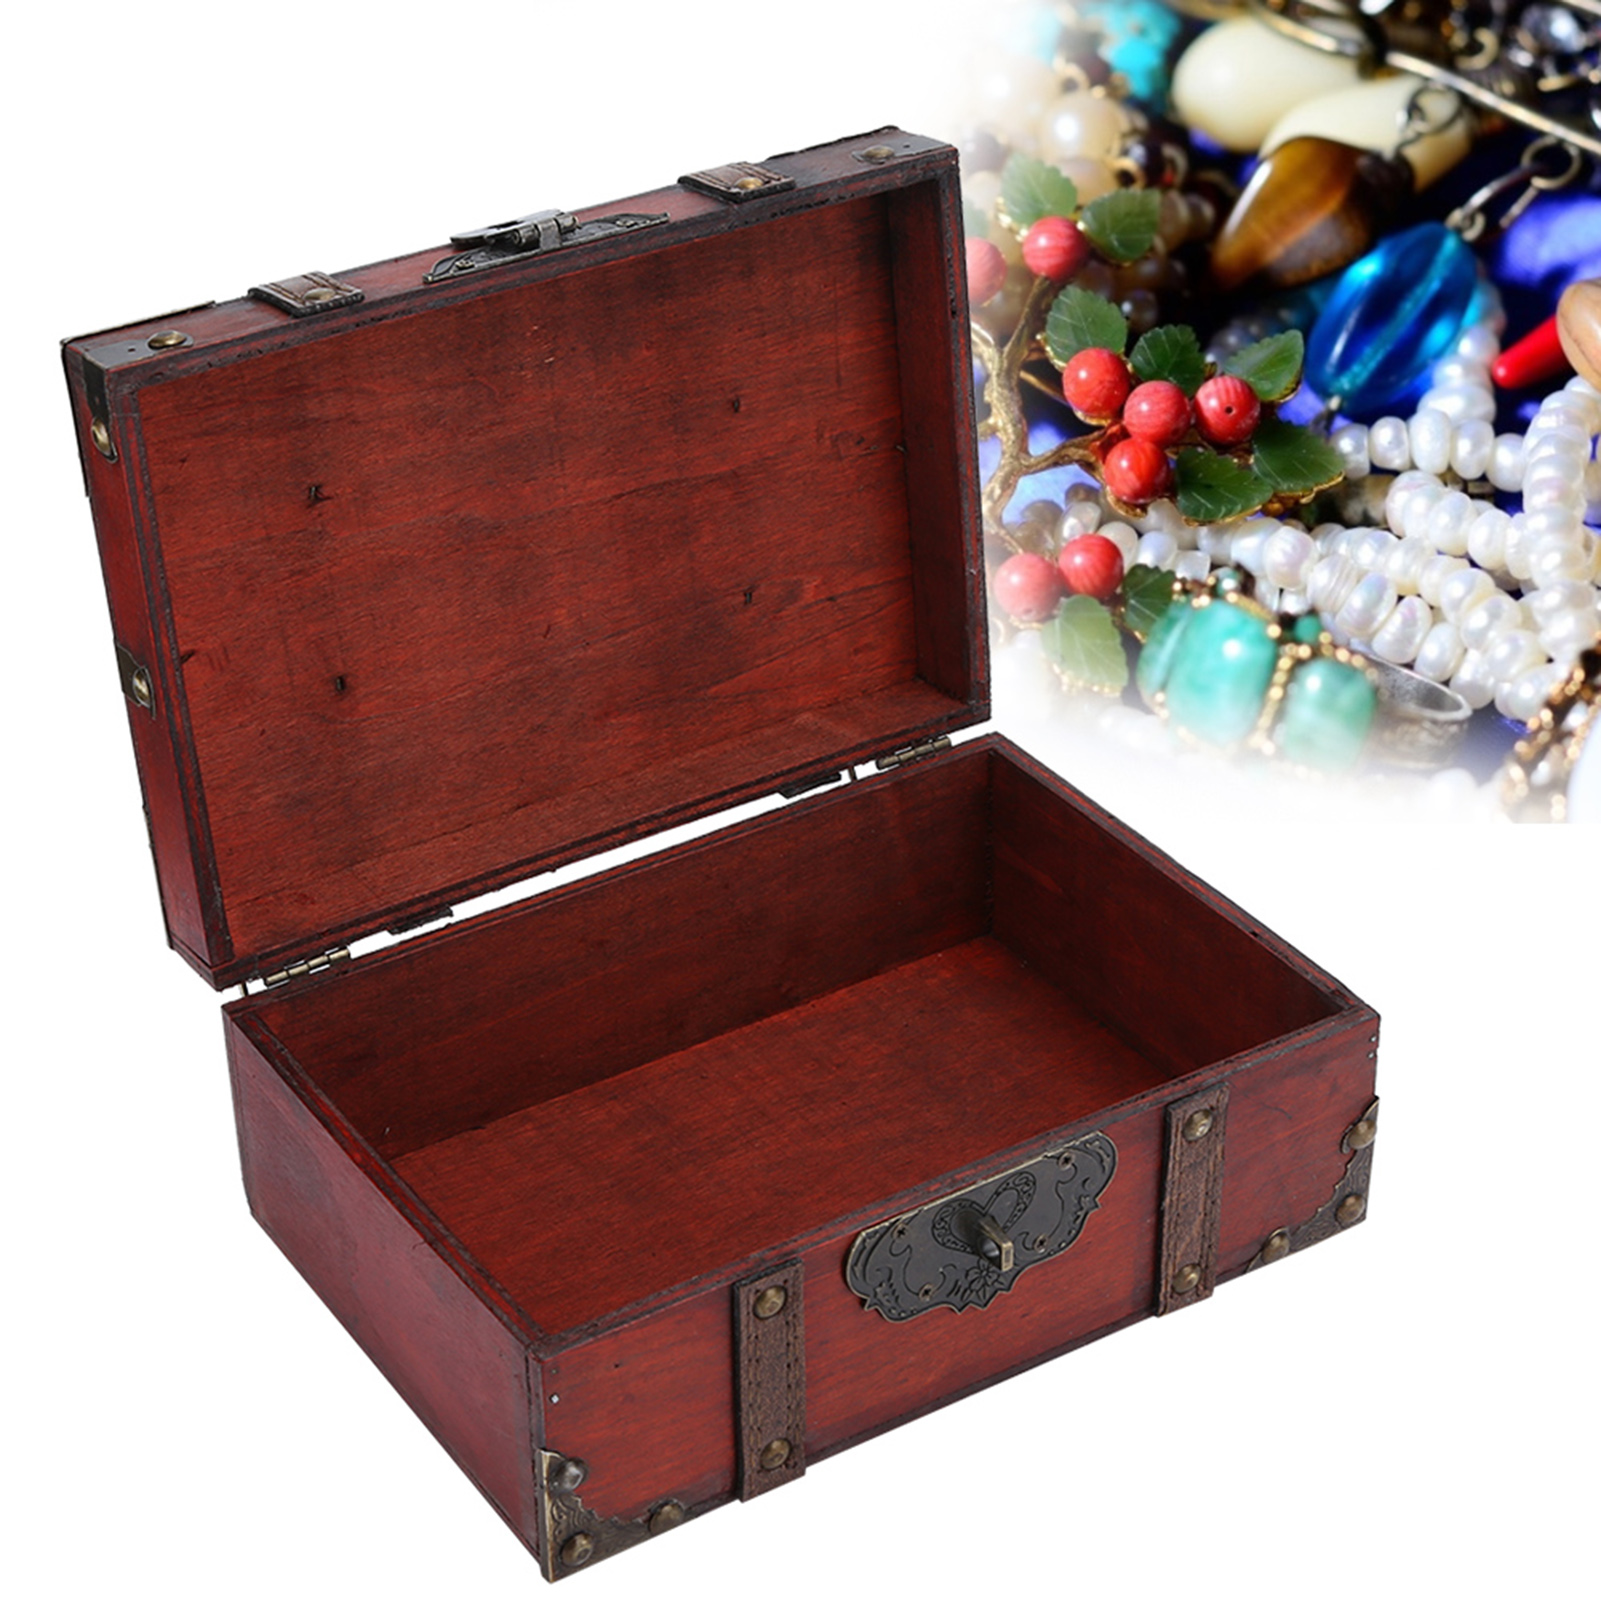 Tebru Wooden Box, Vintage Suitcase Lockable Box Vintage Wooden Storage Box  Decorative Jewelry Box With Lock For Home Large 32 X 23.5 X 11.5 Cm